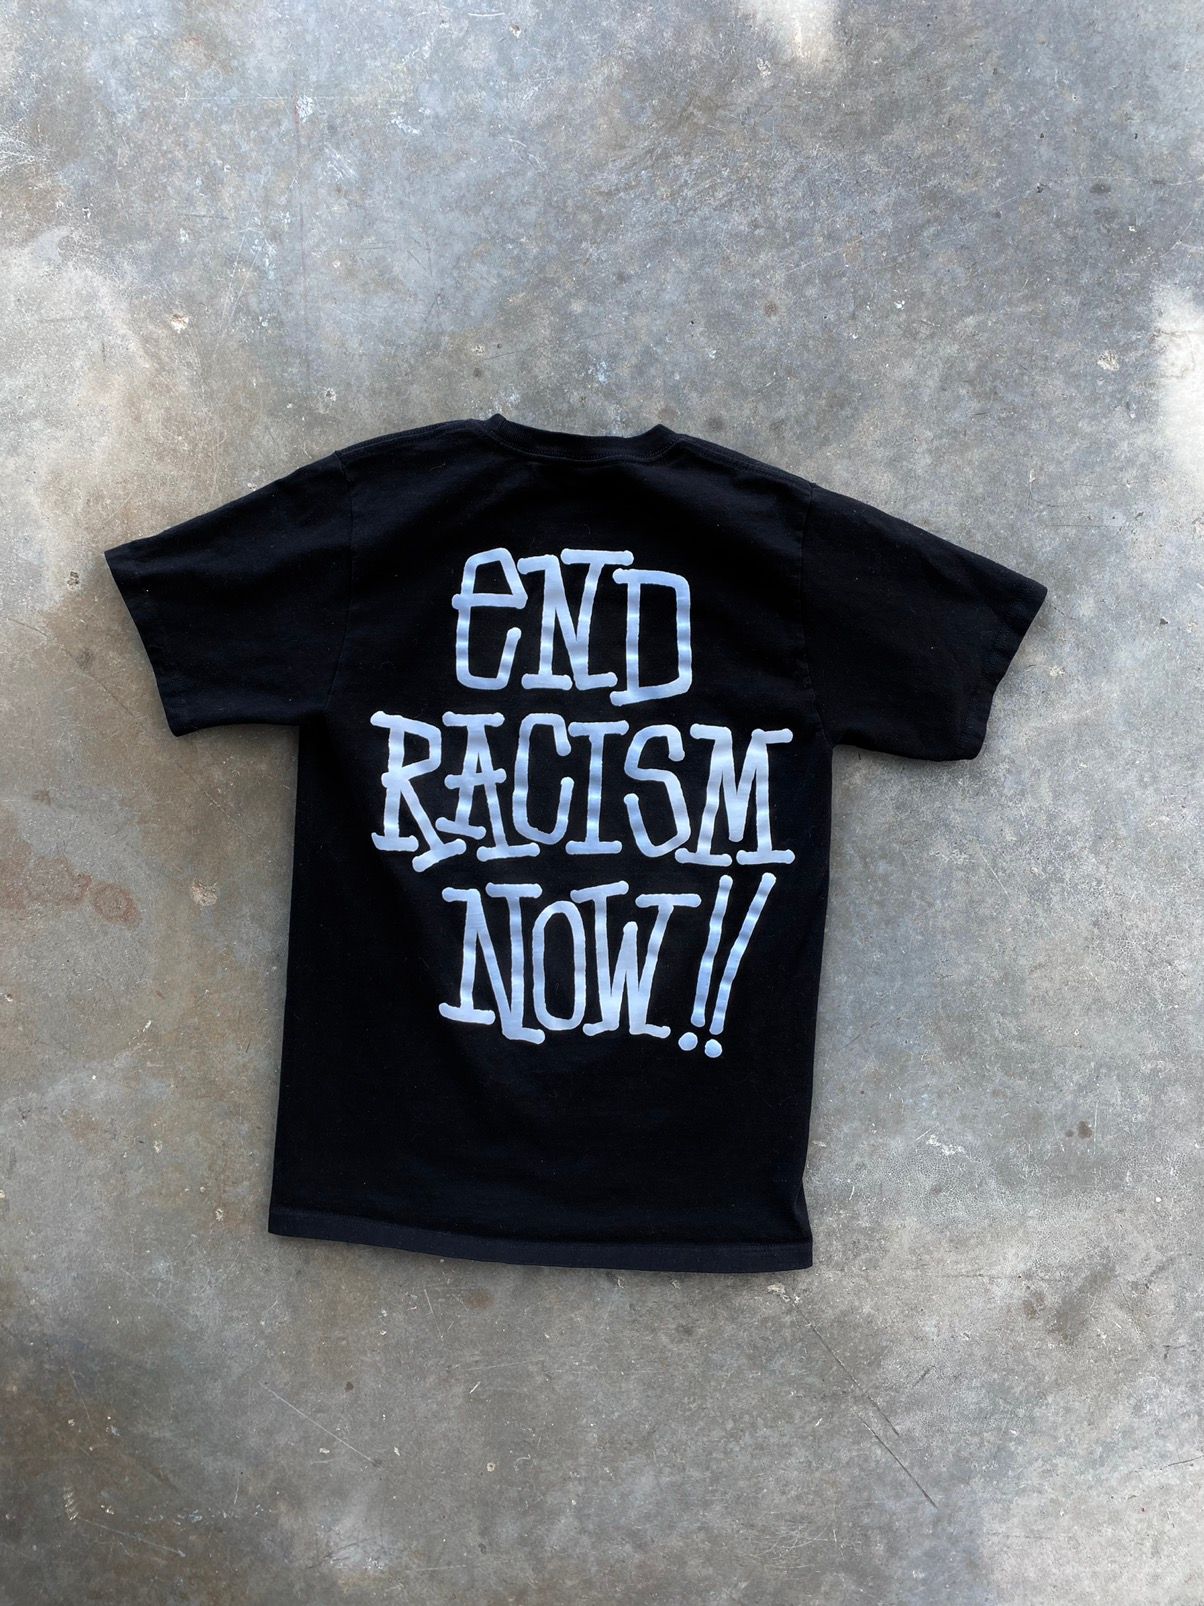 Stussy Stussy Equality “ End Racism Now!! “ Tee Black Small